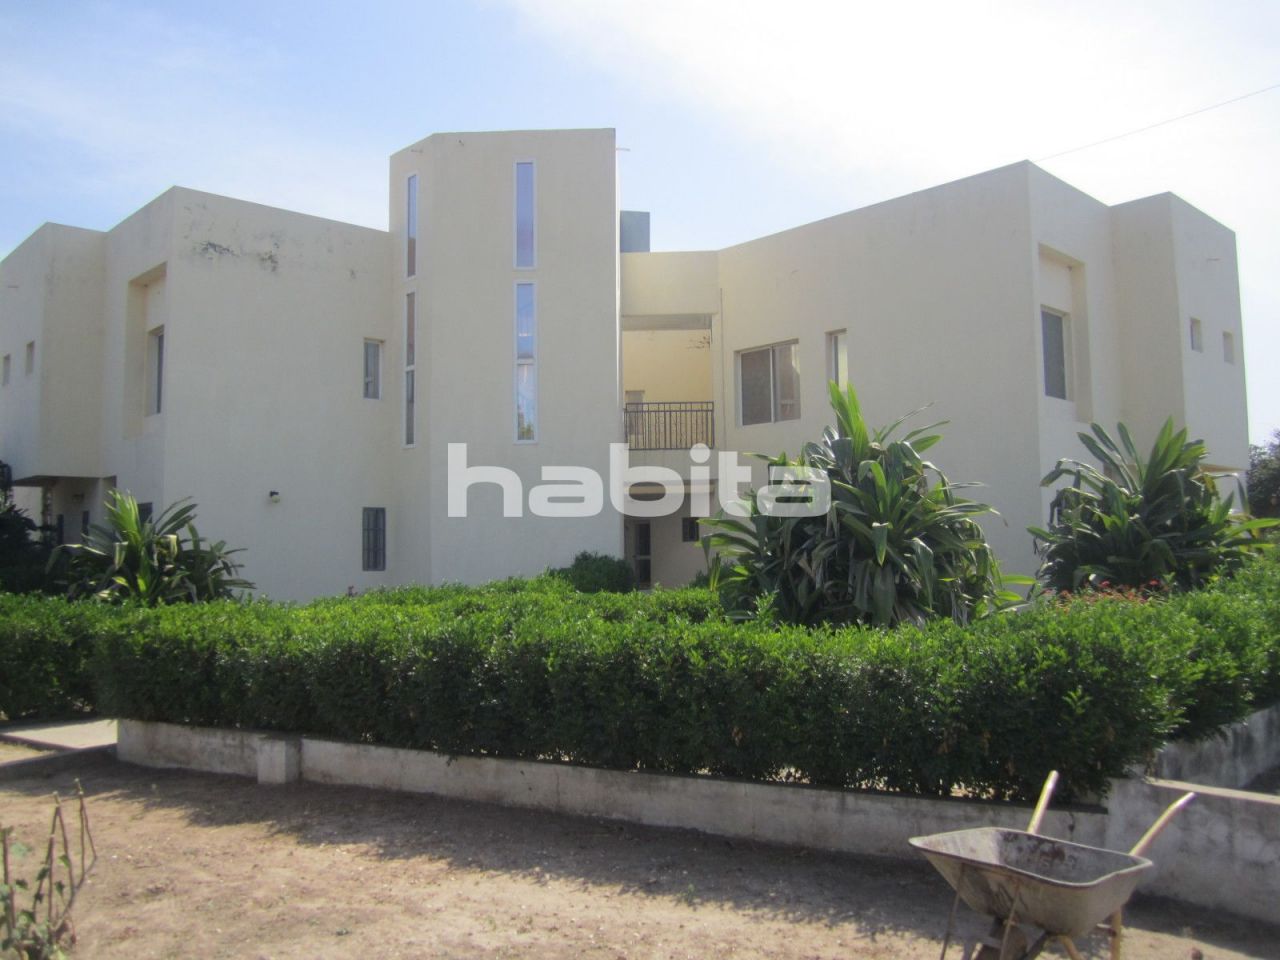 Apartment Tujering, Gambia, 120 m2 - Foto 1